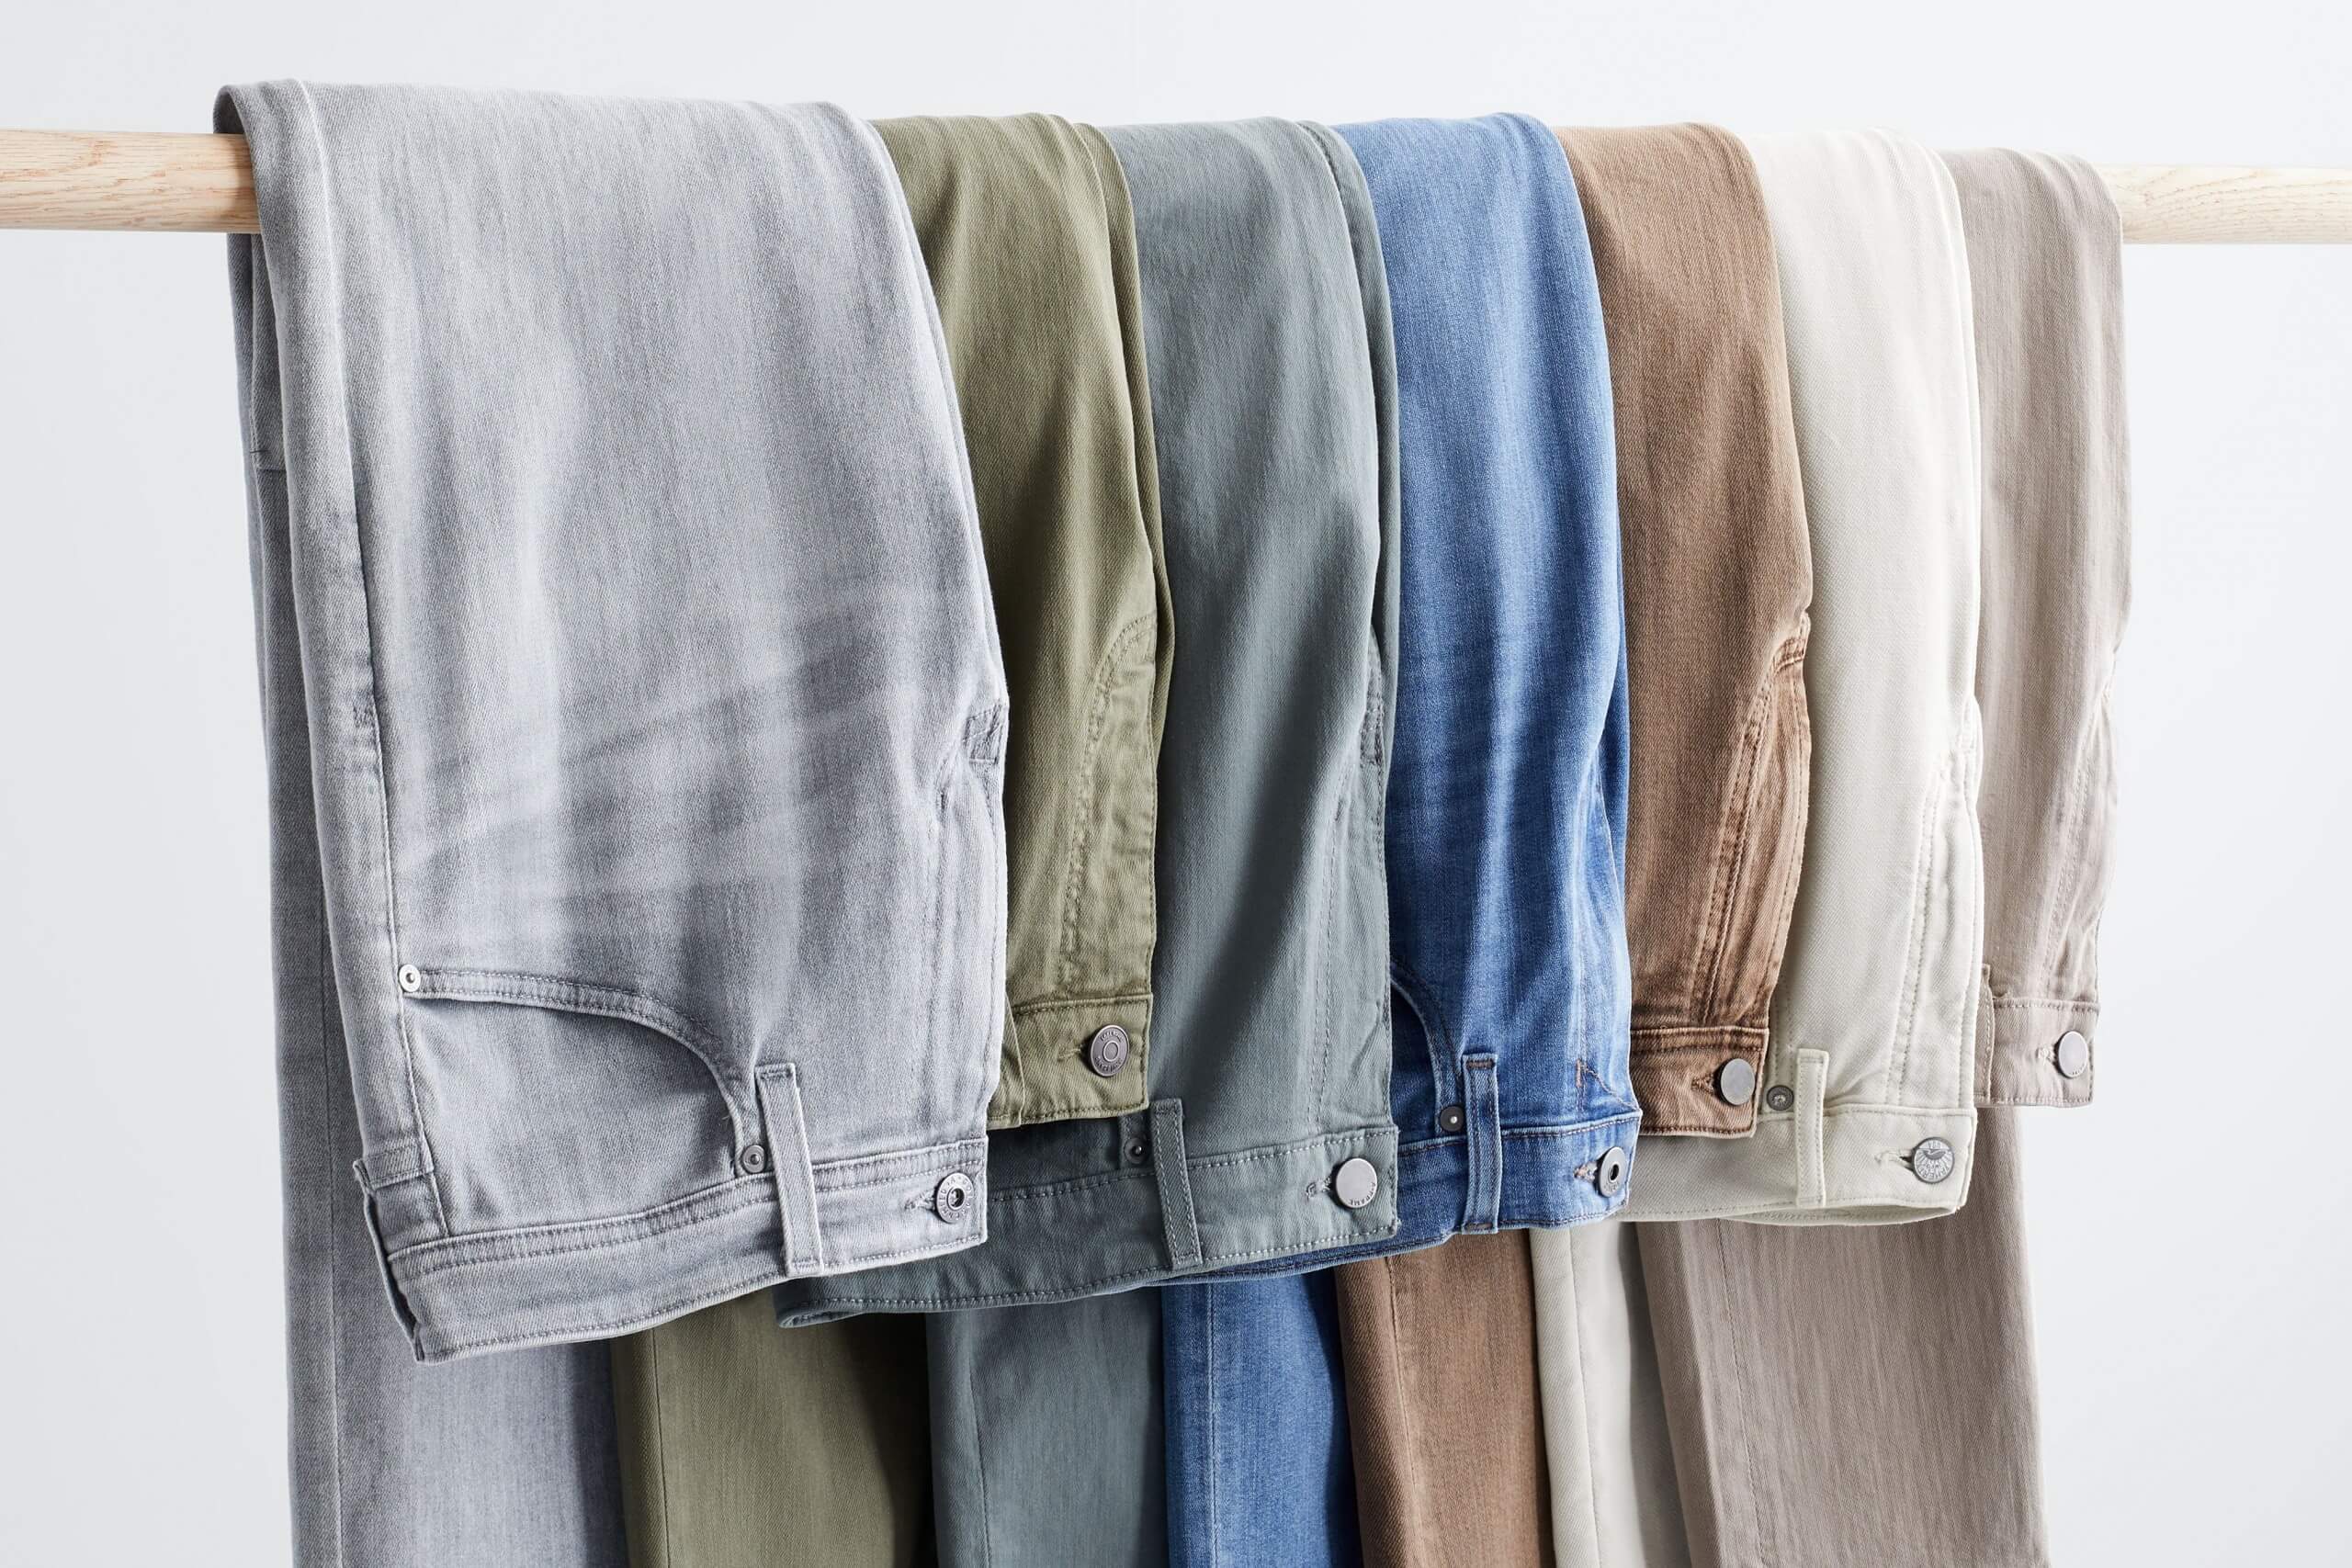 Stitch Fix rack image of grey jeans, green jeans, blue jeans, and brown jeans.